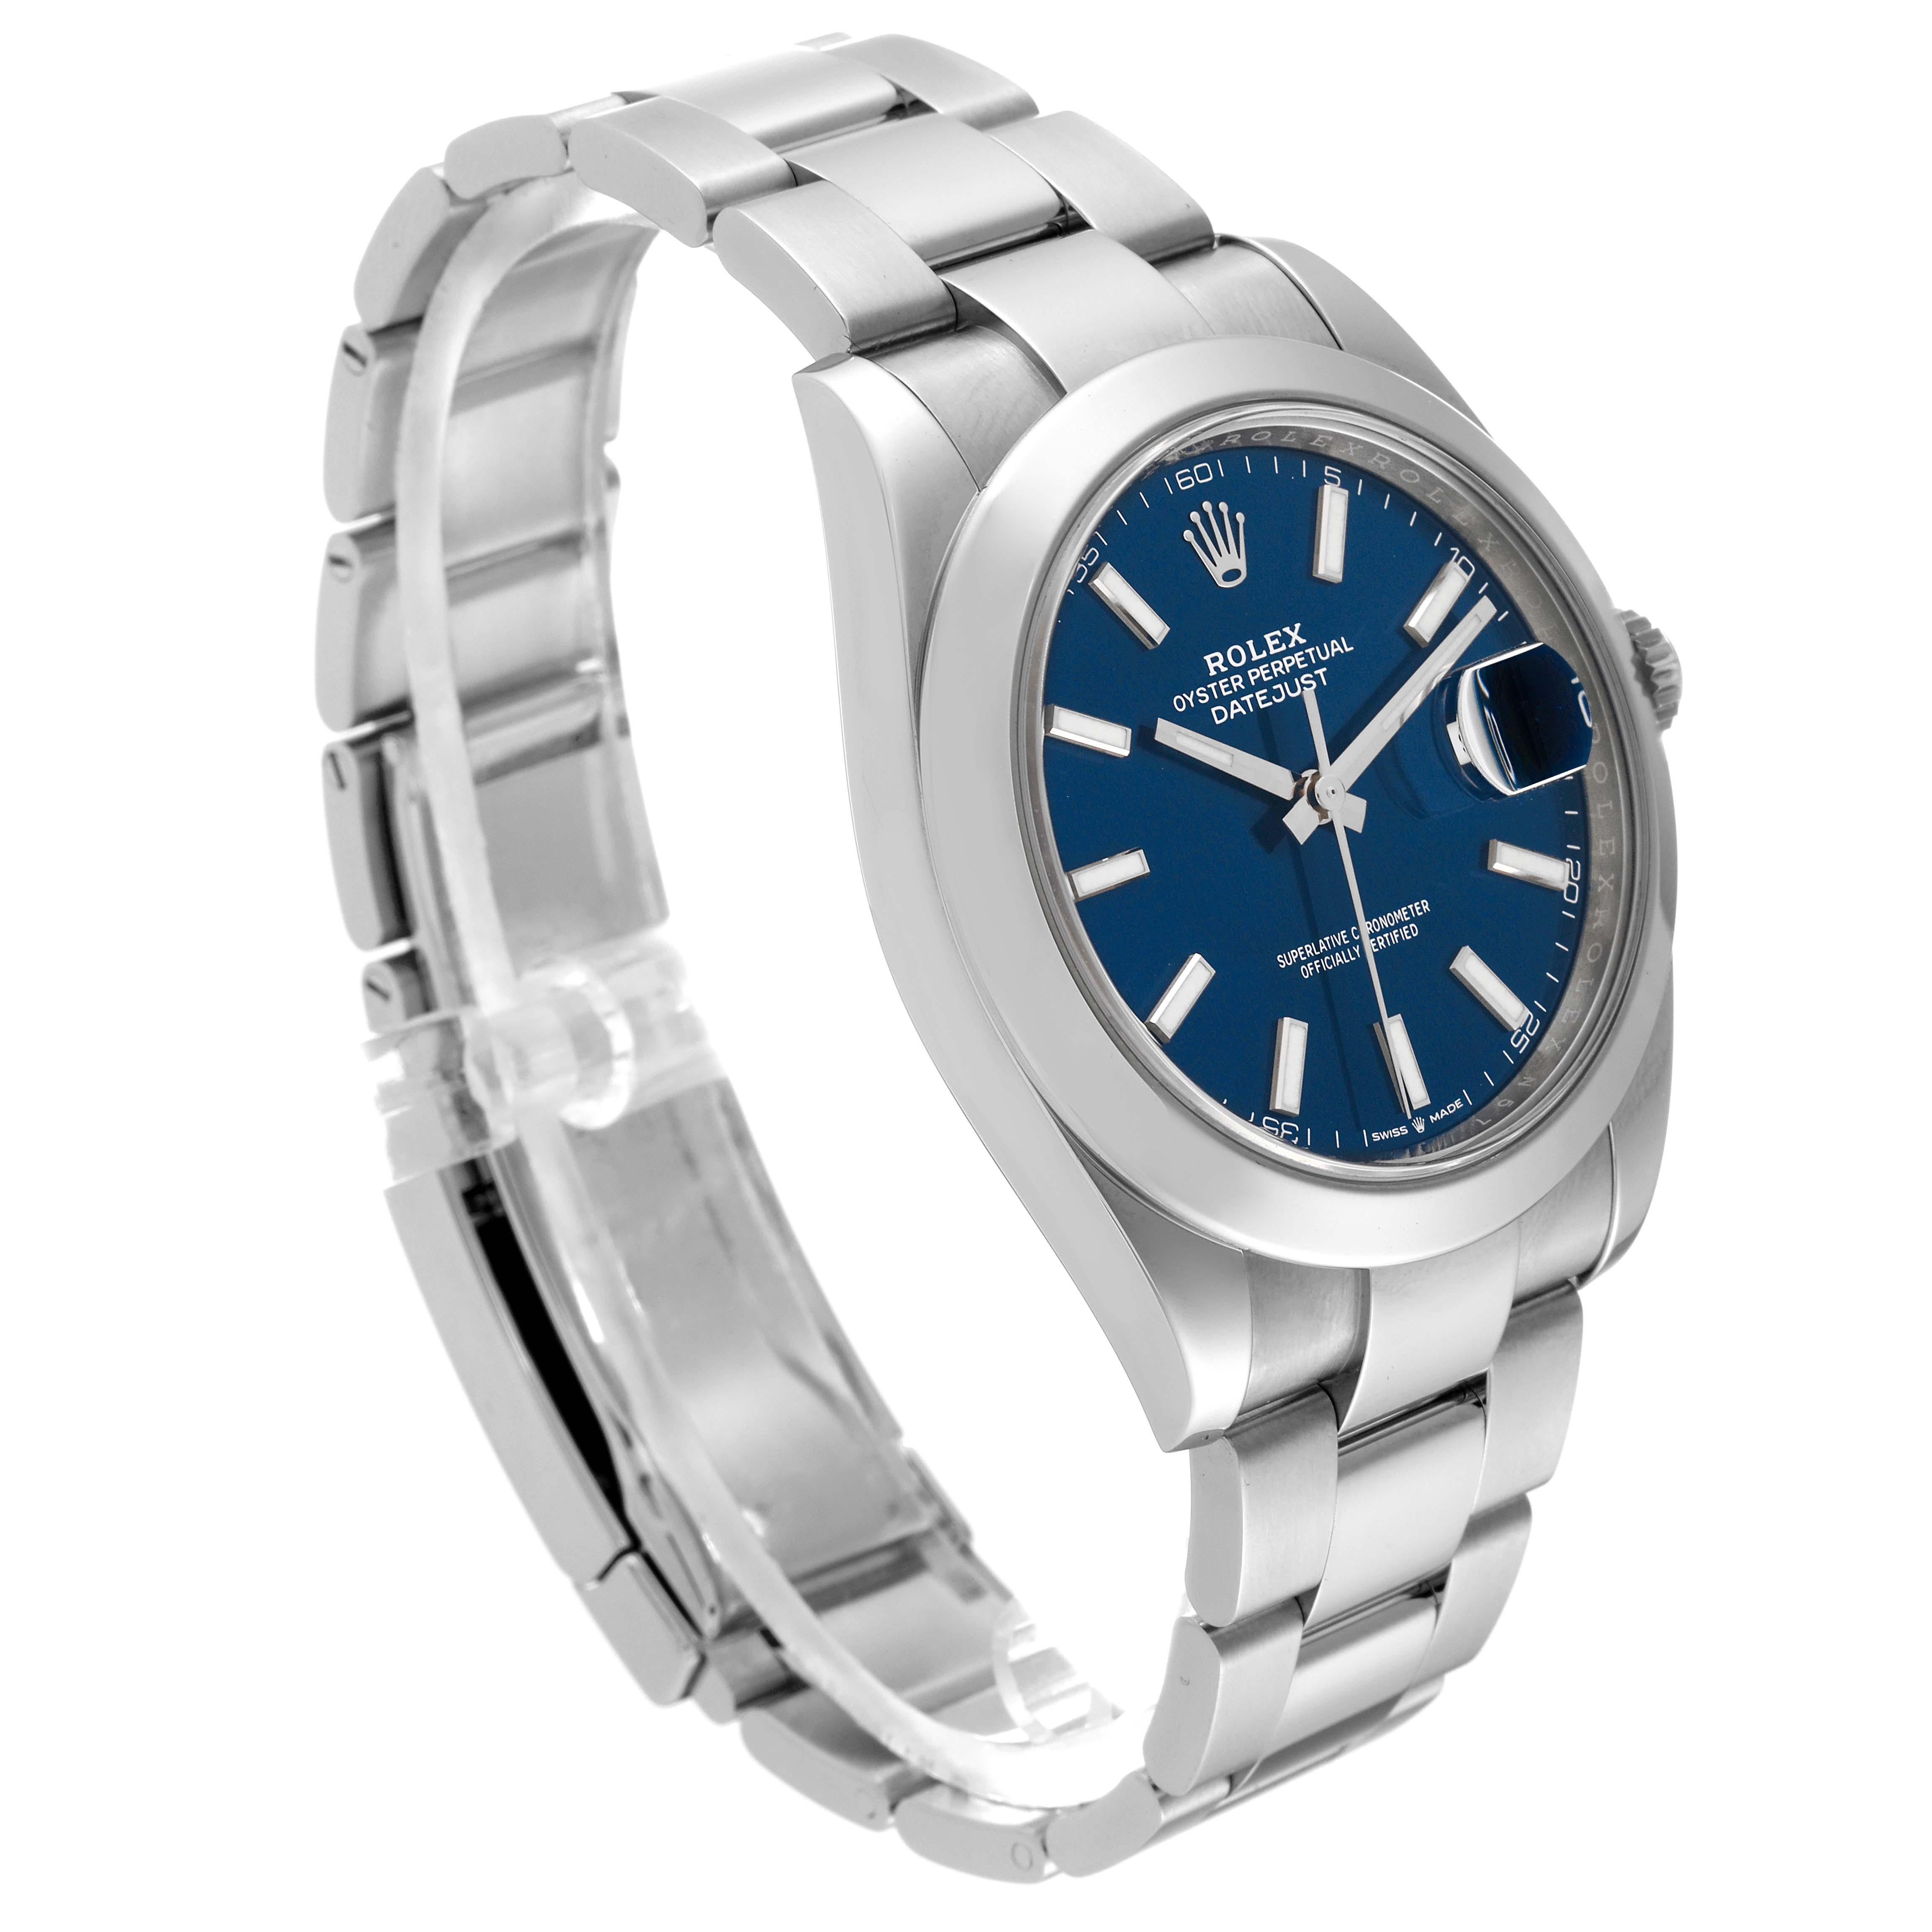 Men's Rolex Datejust 41 Blue Dial Smooth Bezel Steel Mens Watch 126300 Box Card For Sale